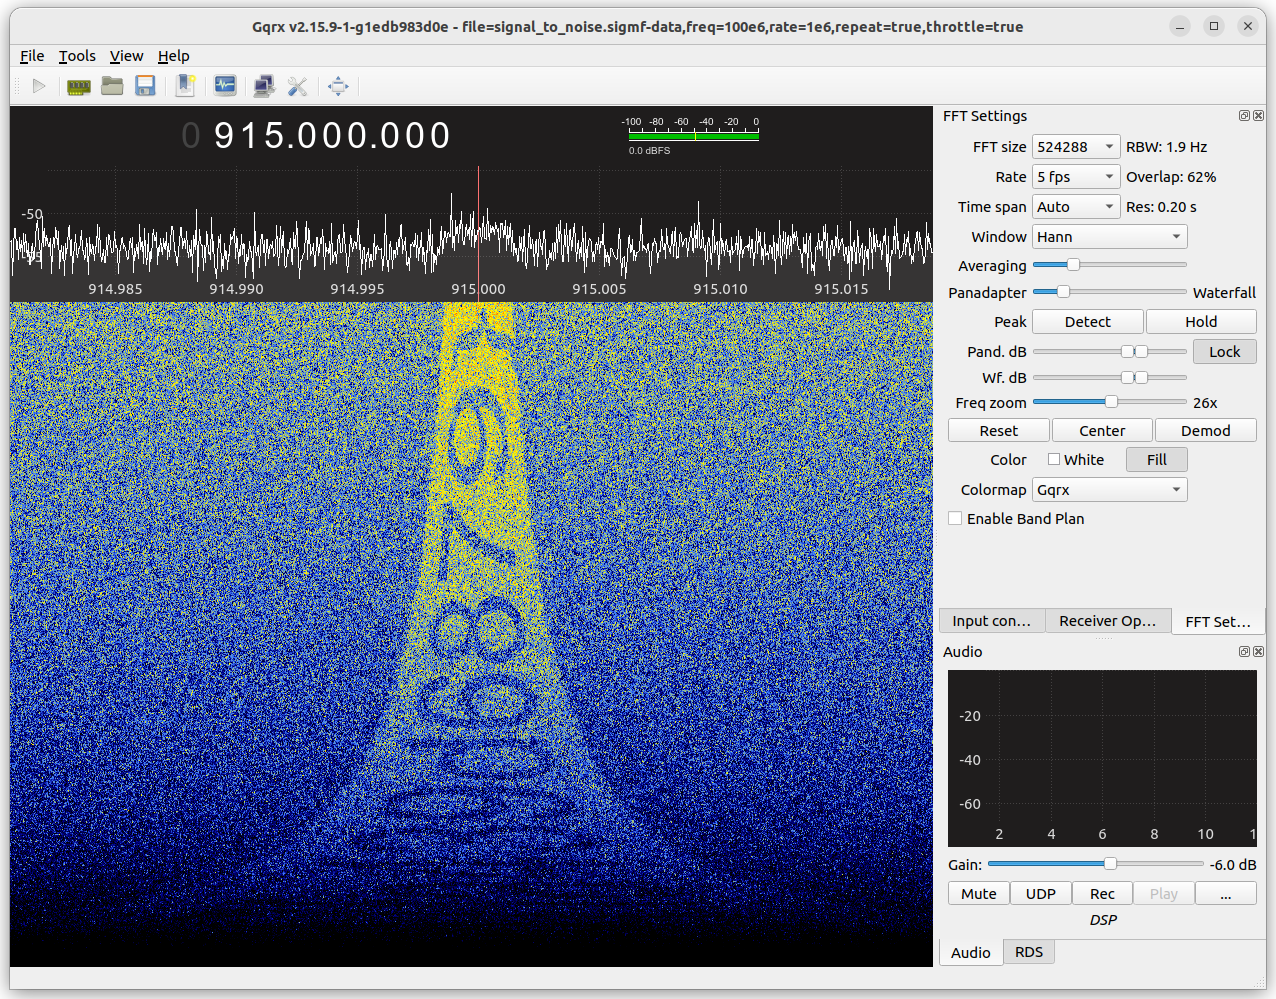 The end of the flag for "Signal to noise", as viewed in Gqrx